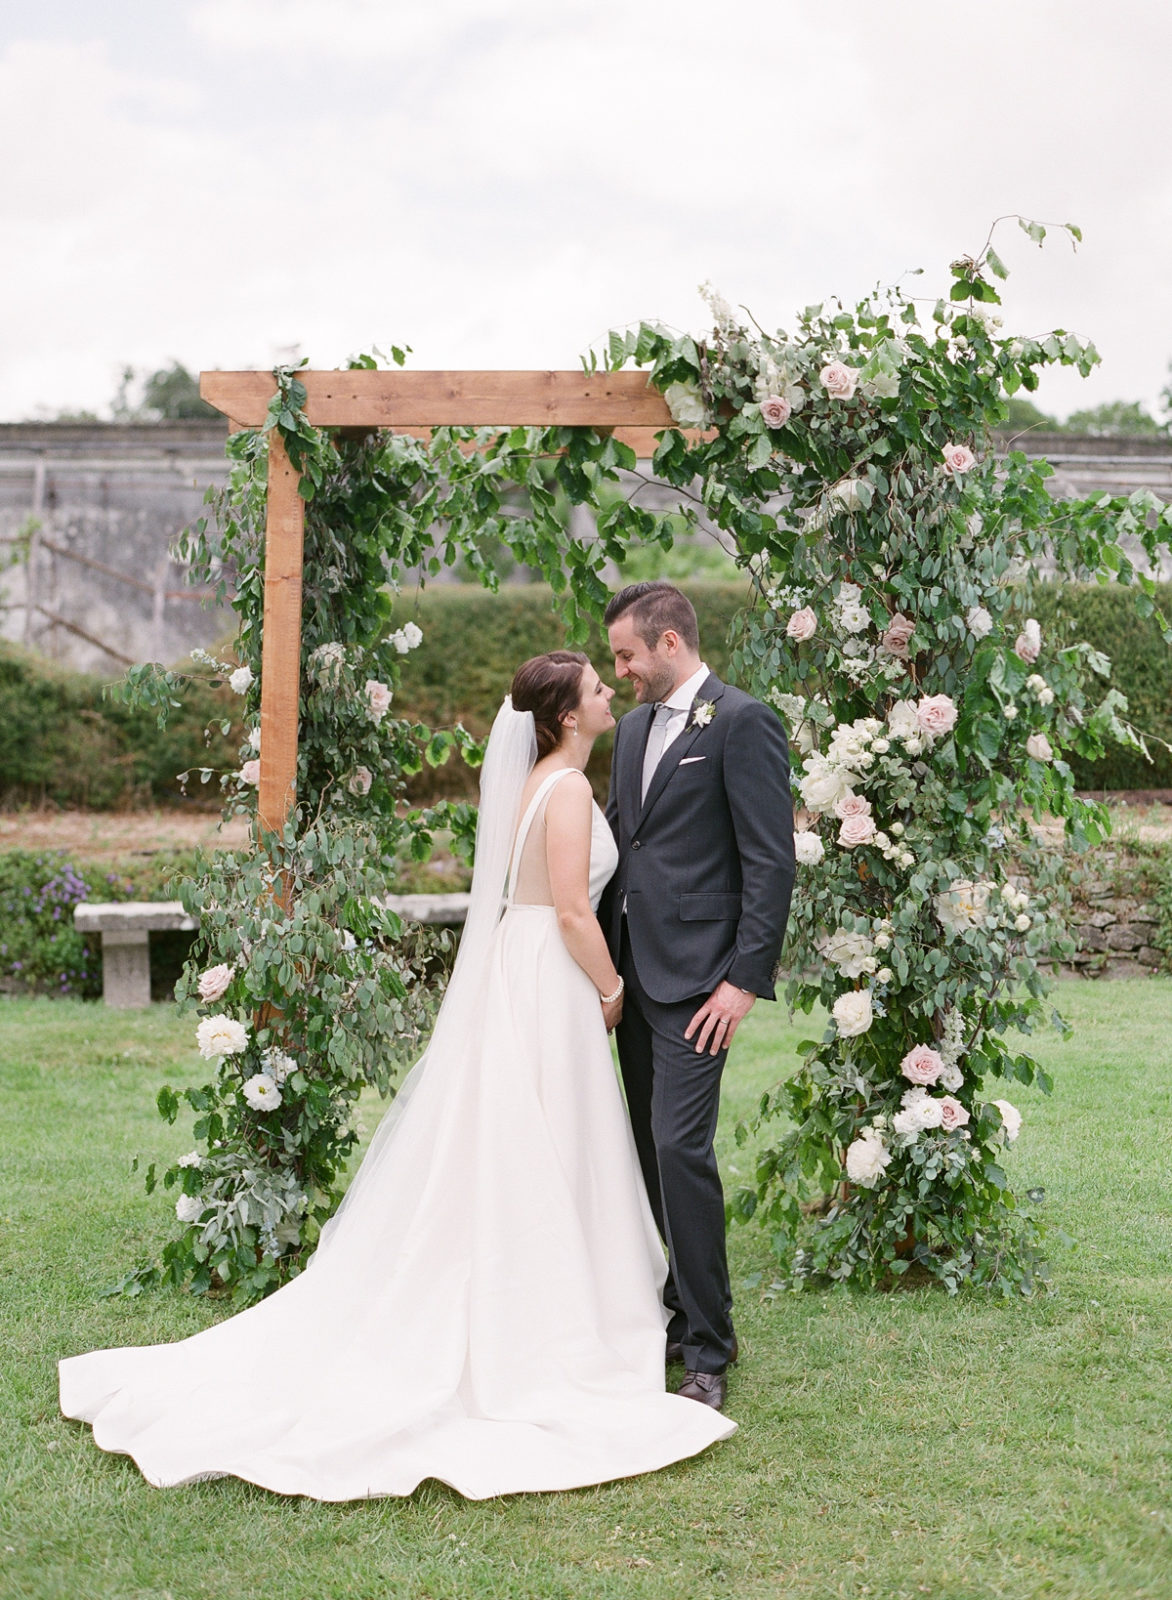 Ireland Film Photographer | Molly Carr Photography | Bride and Groom in Front of Flower Arch at Mount Juliet Estate